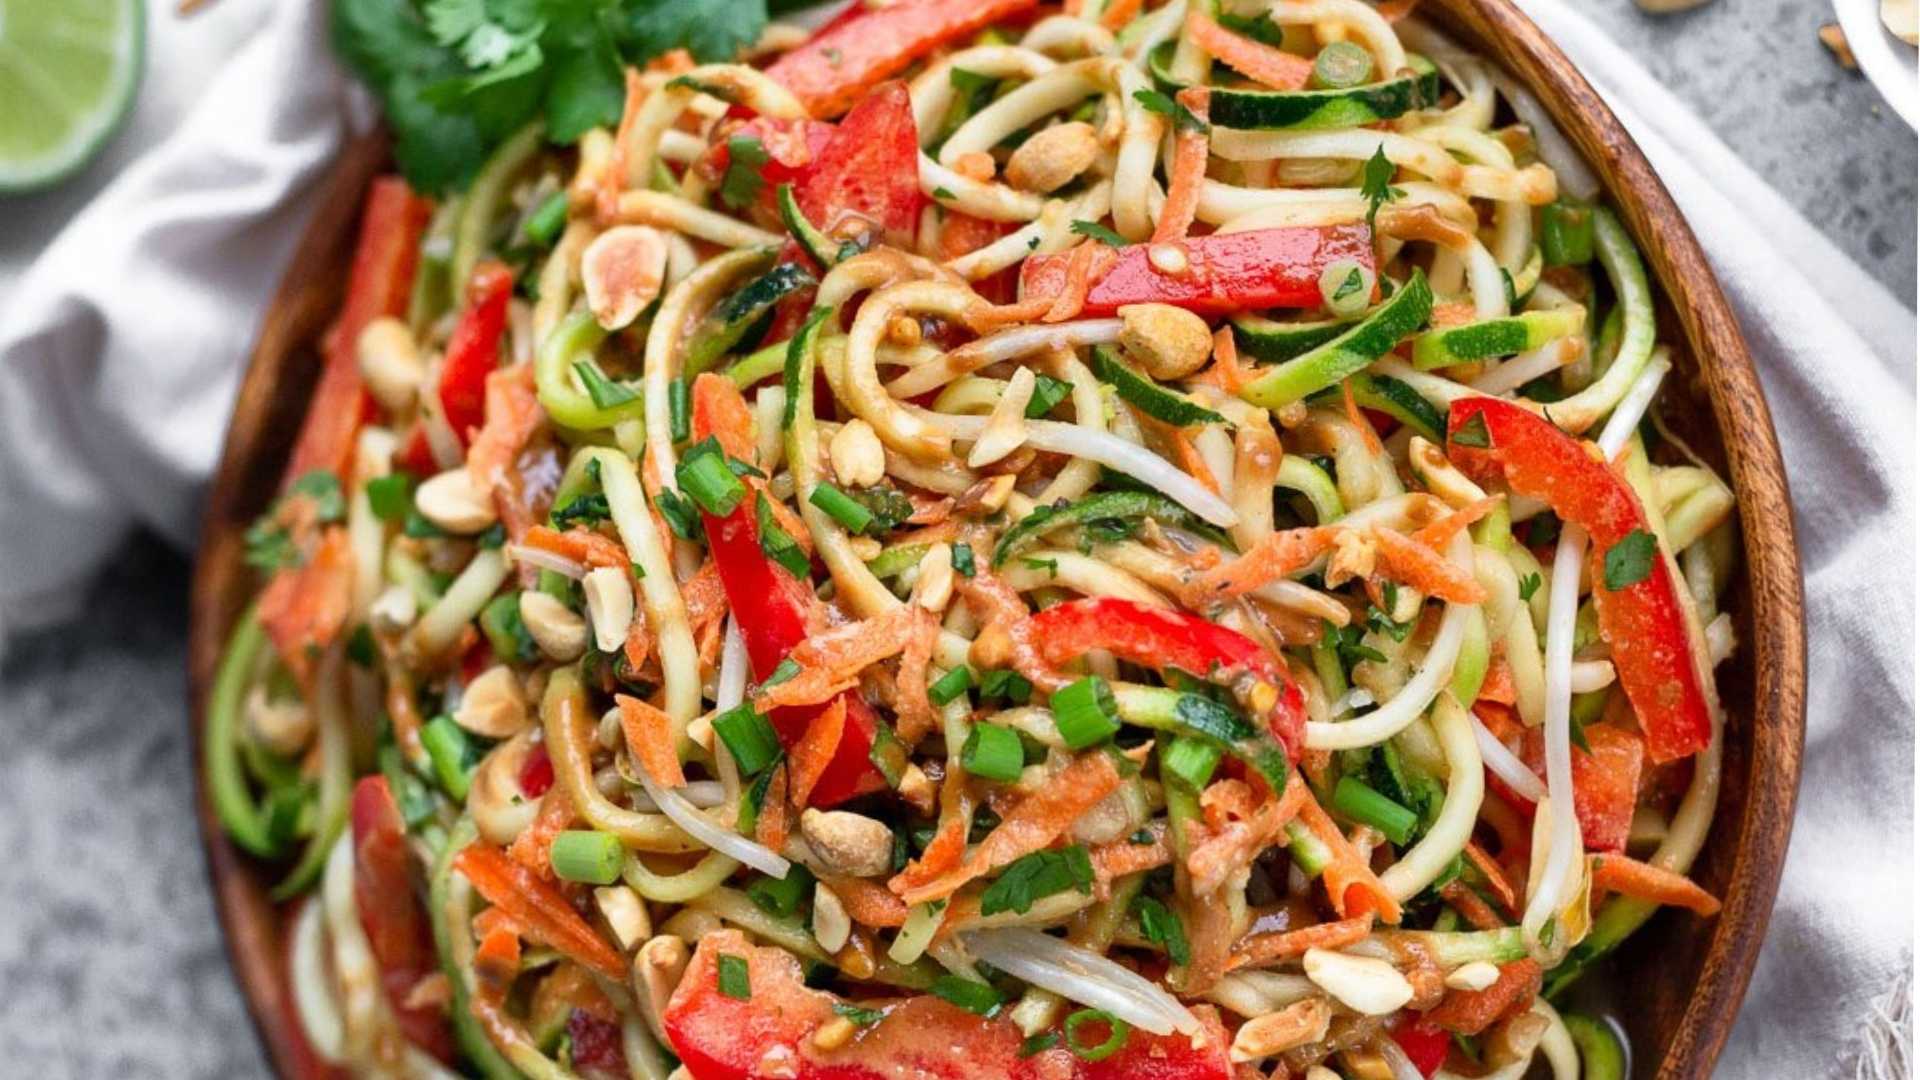 https://muneezaahmed.com/wp-content/uploads/2022/02/Raw-Pad-Thai-Noodle-Salad-Featured.jpg